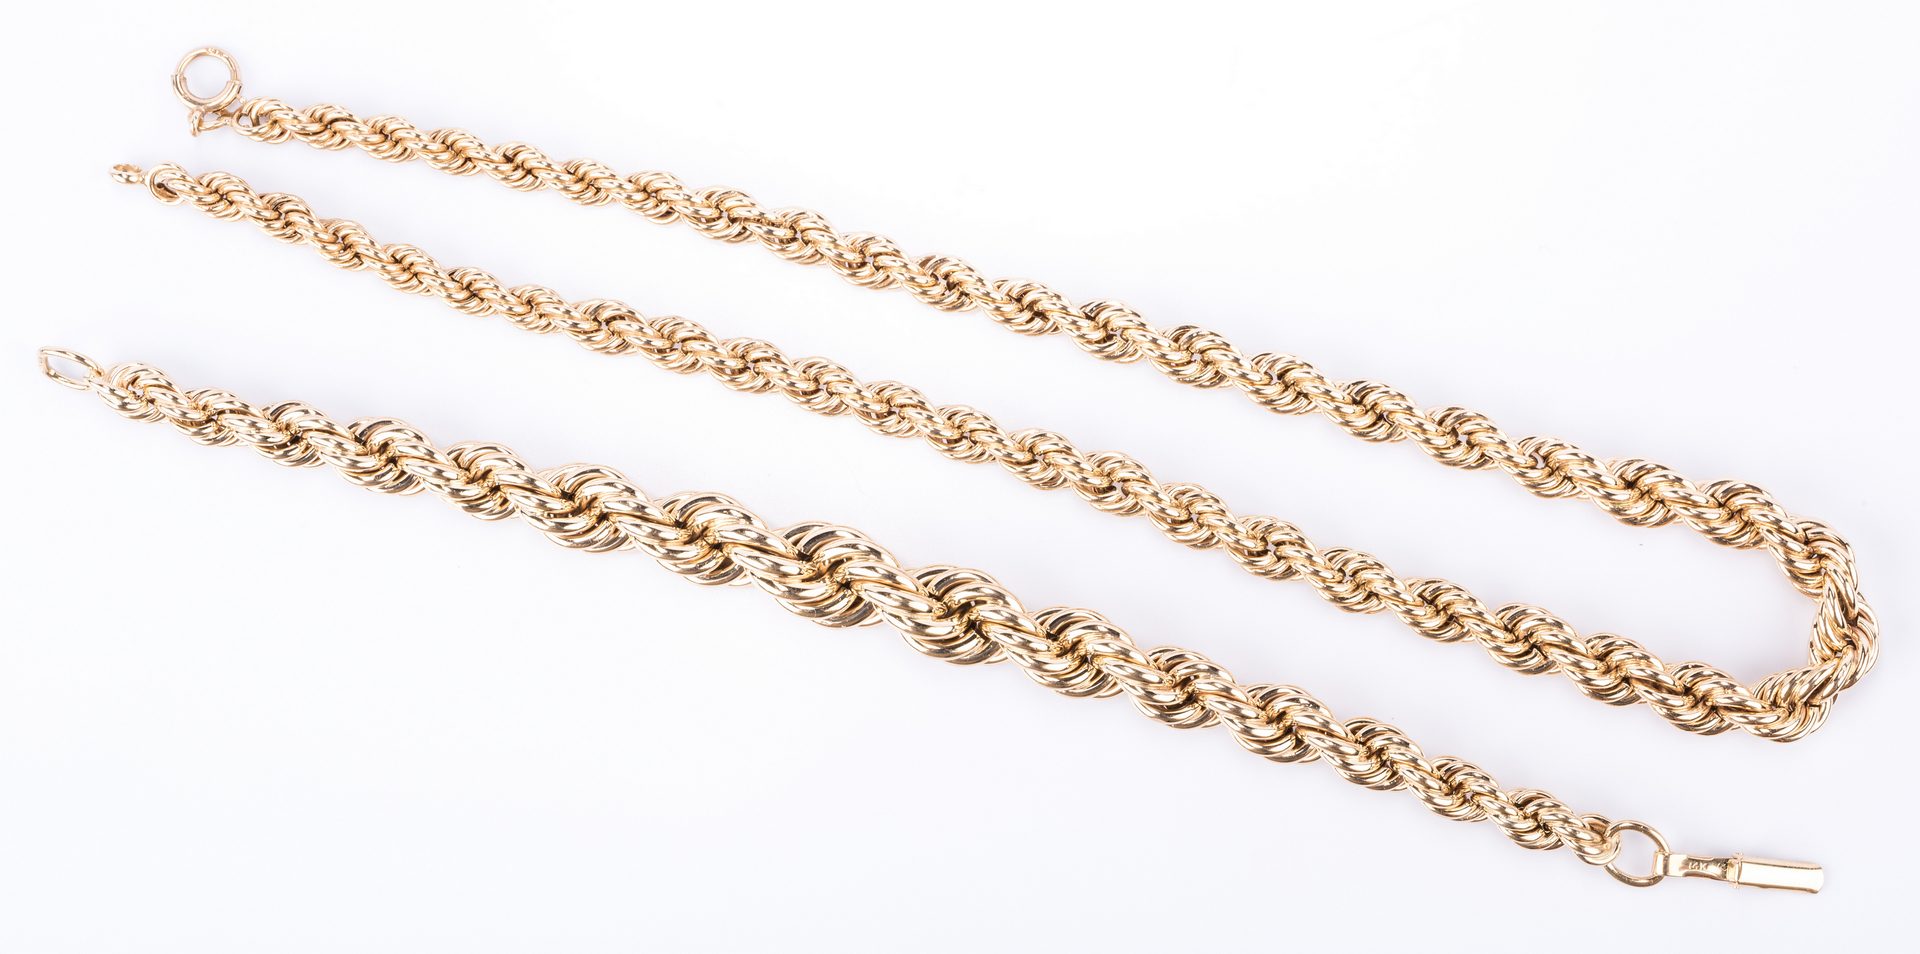 Lot 374: 14K Rope Chain and Bracelet. 38.6 grams, 2 items